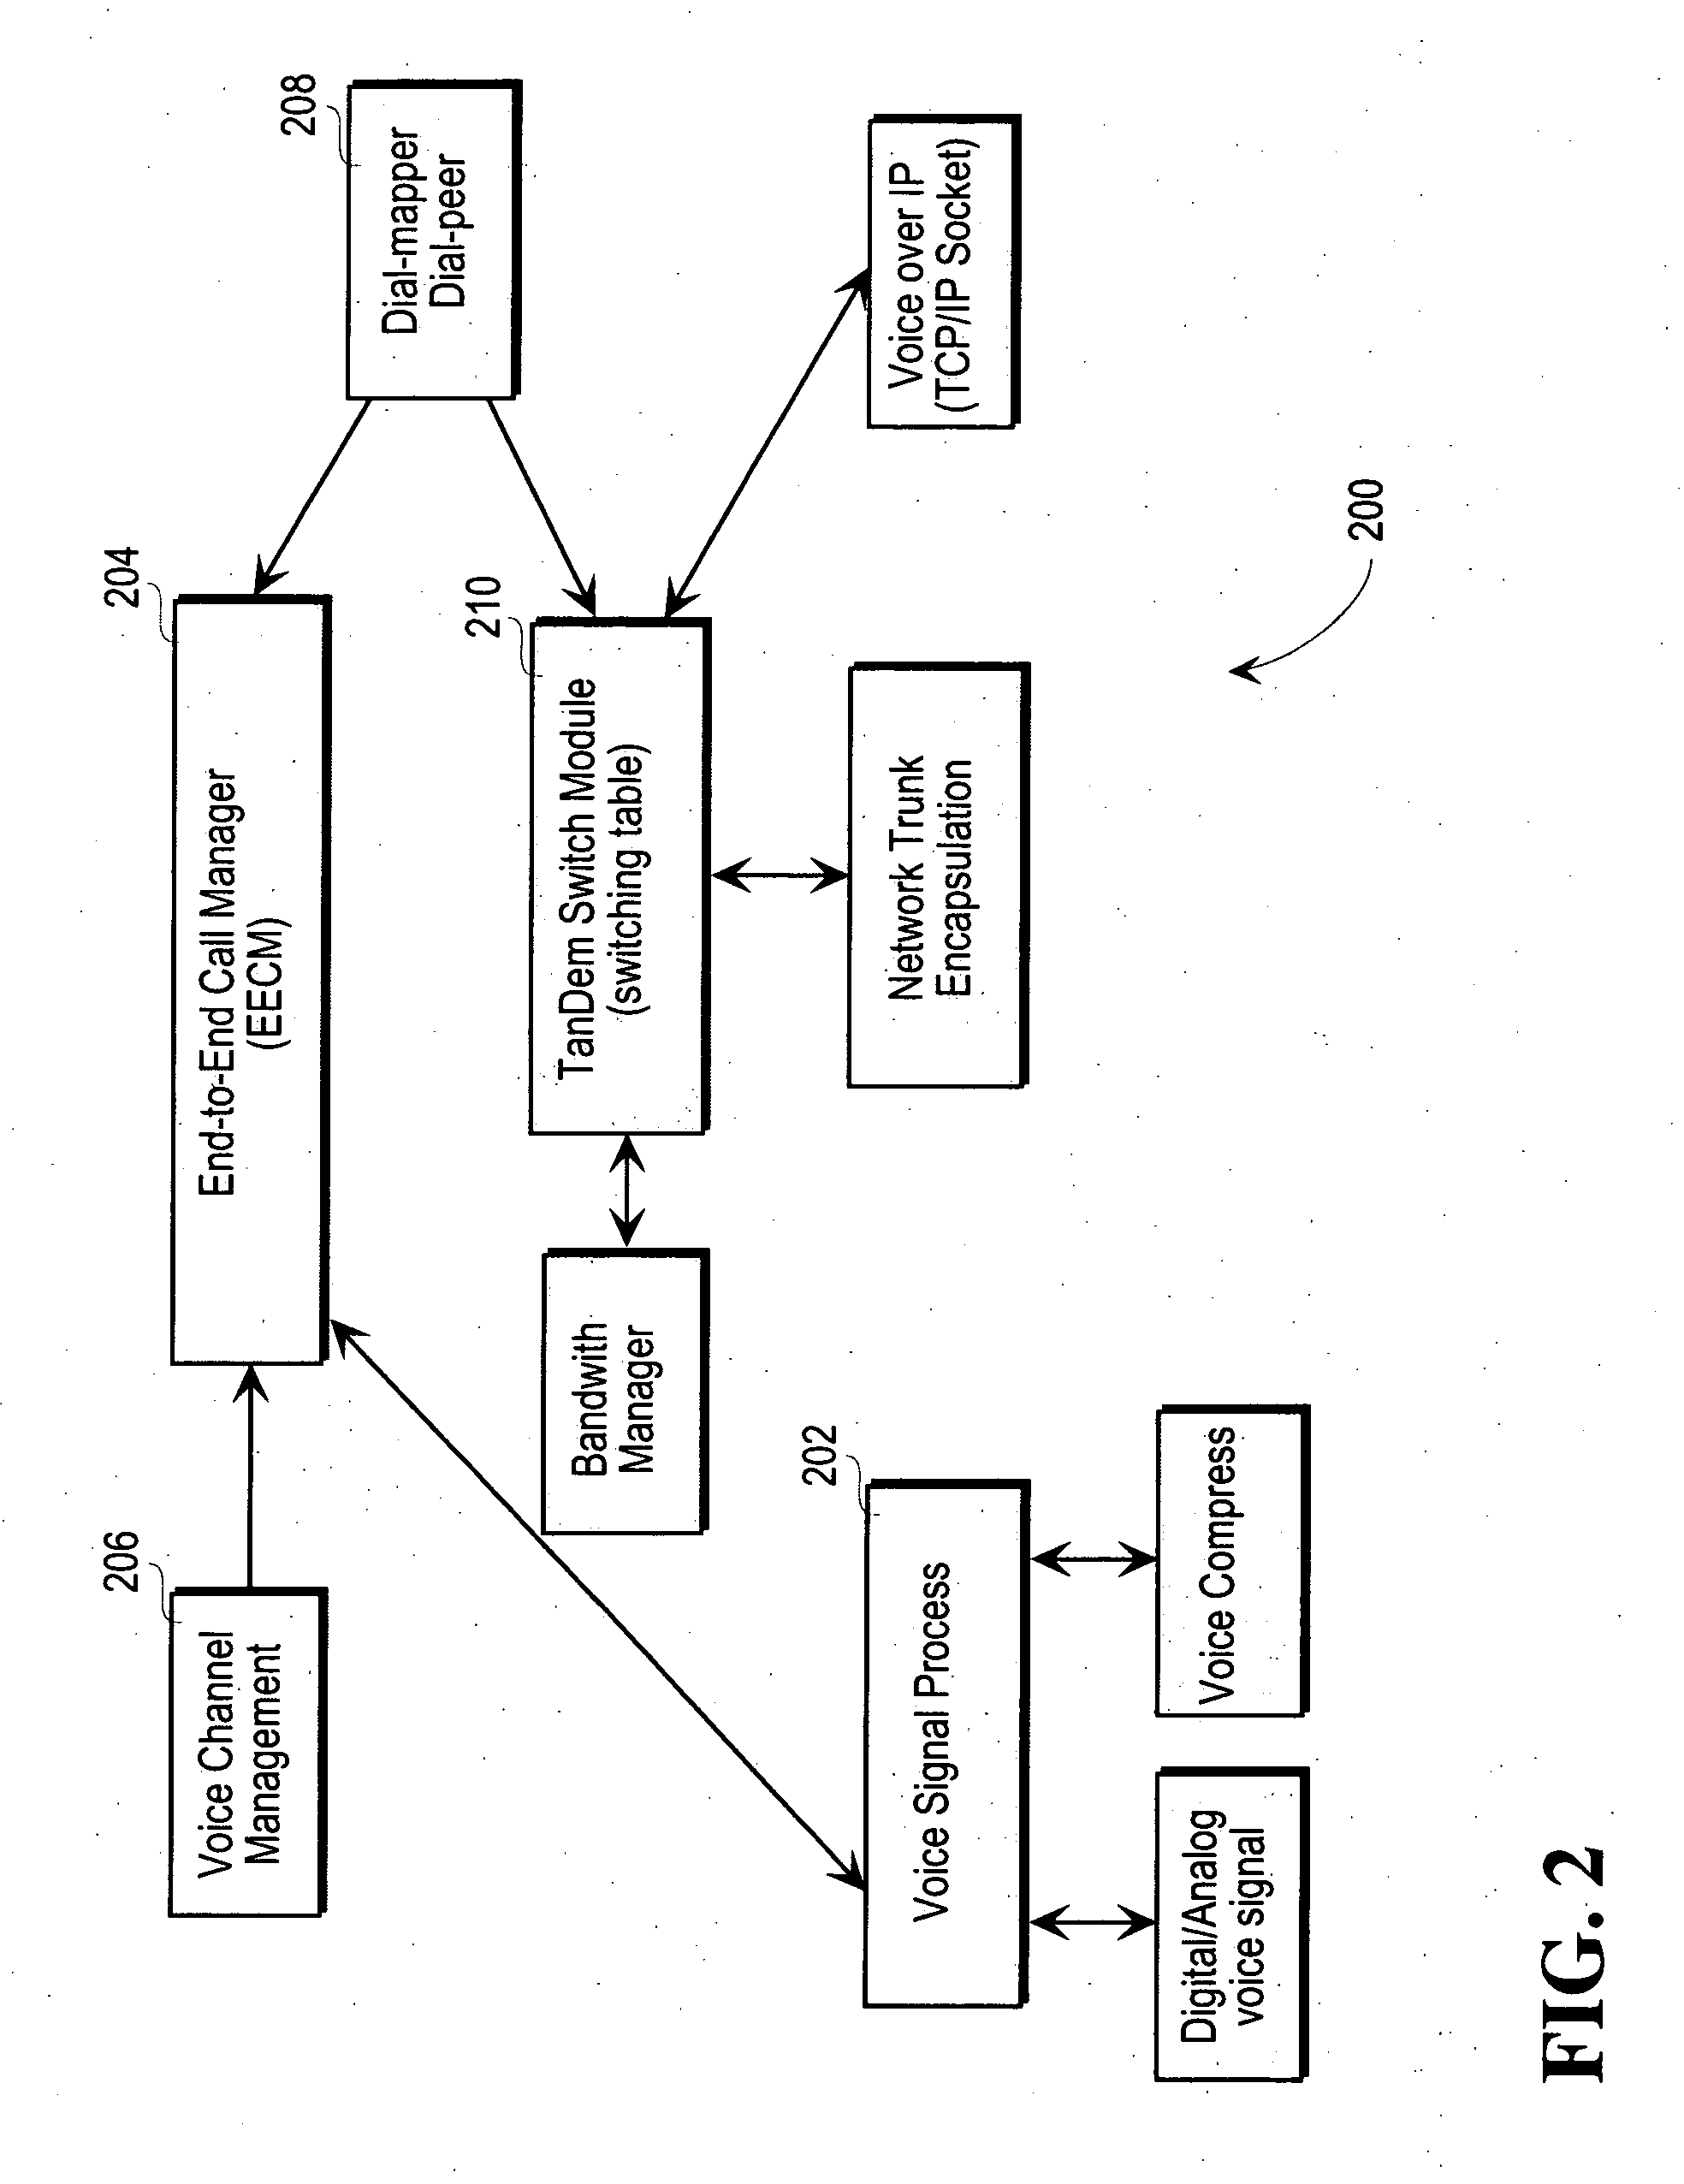 Method and apparatus for providing ringing timeout disconnect supervision in remote telephone extensions using voice over packet-data-network systems (VOPS)